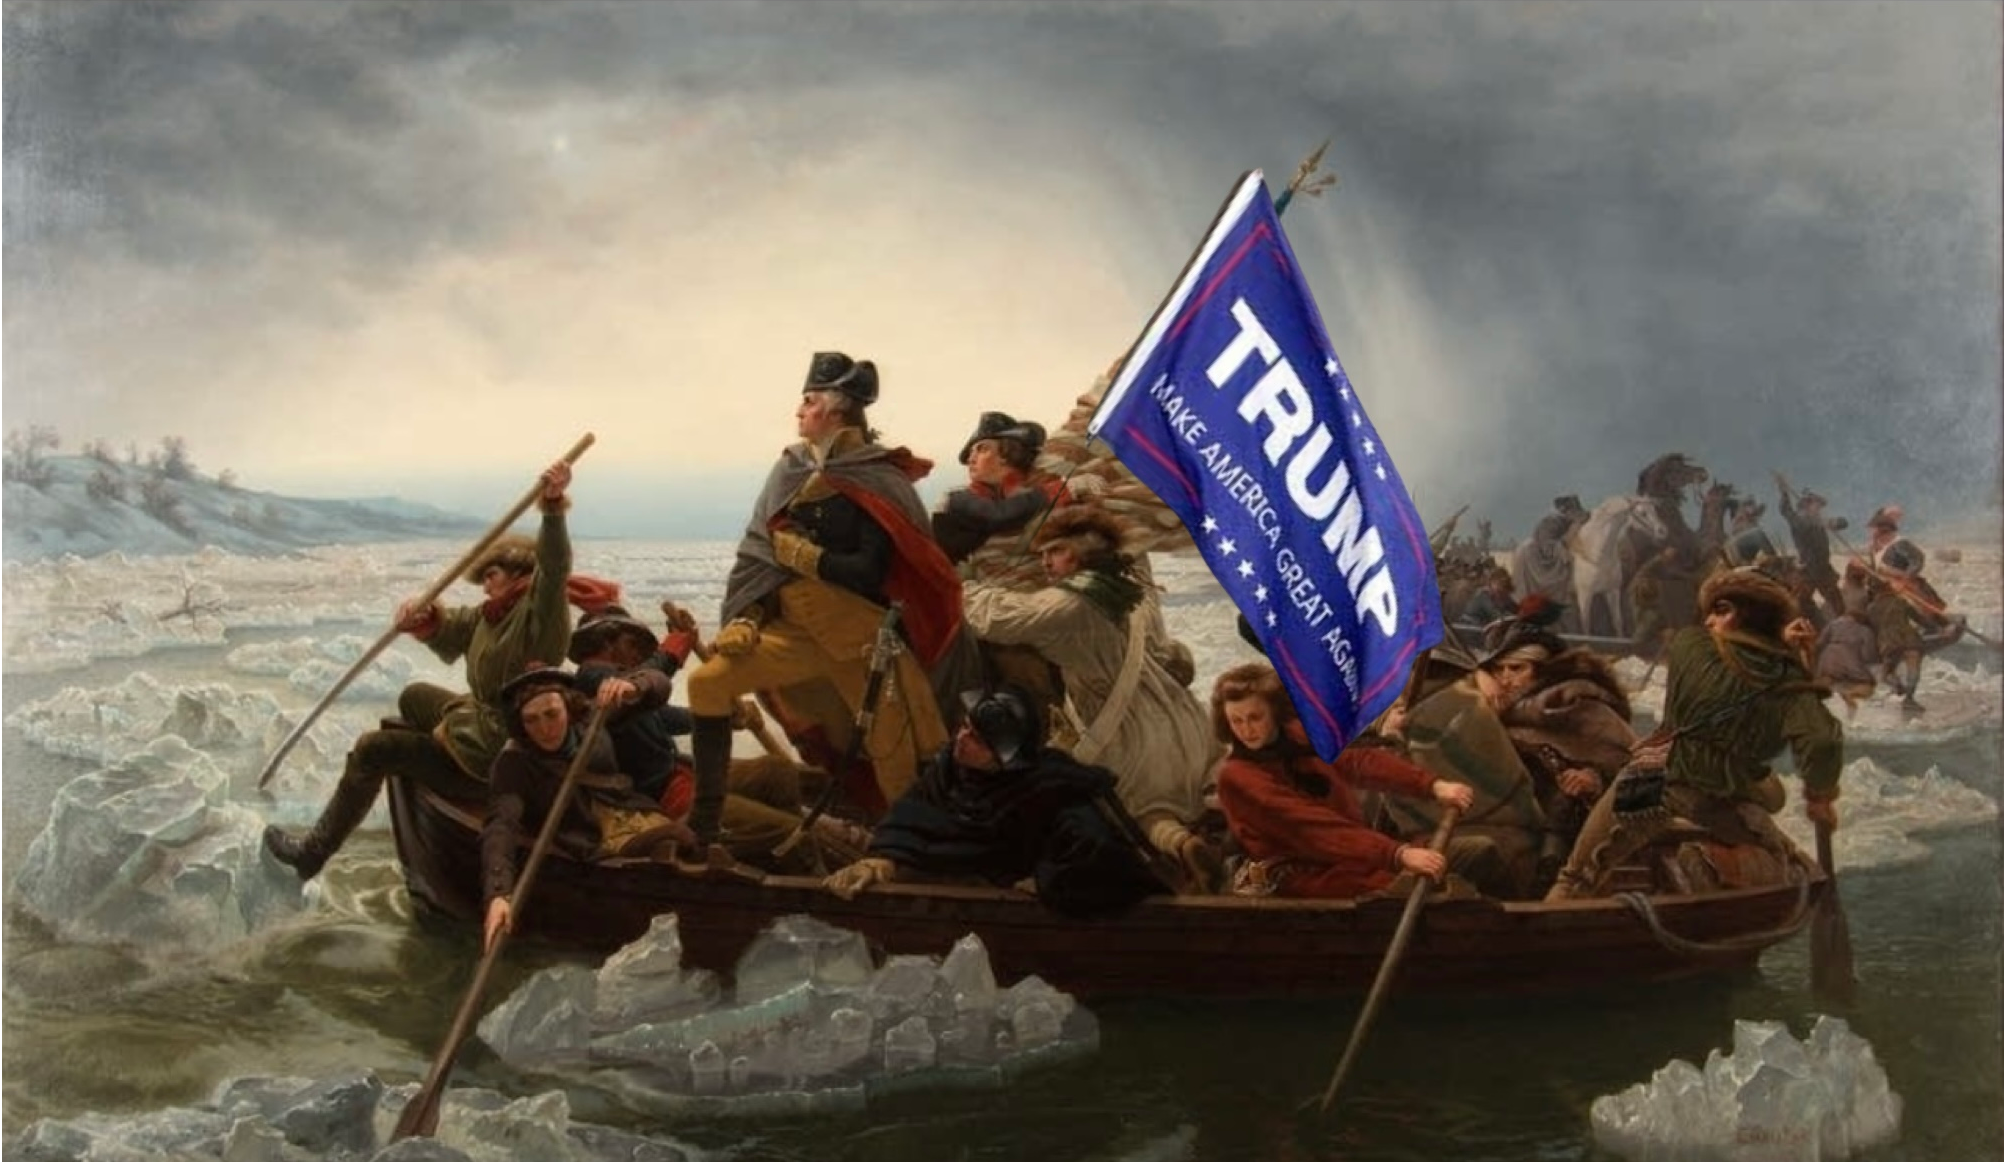 Wallpaper Of The Day: Crossing the Delaware!